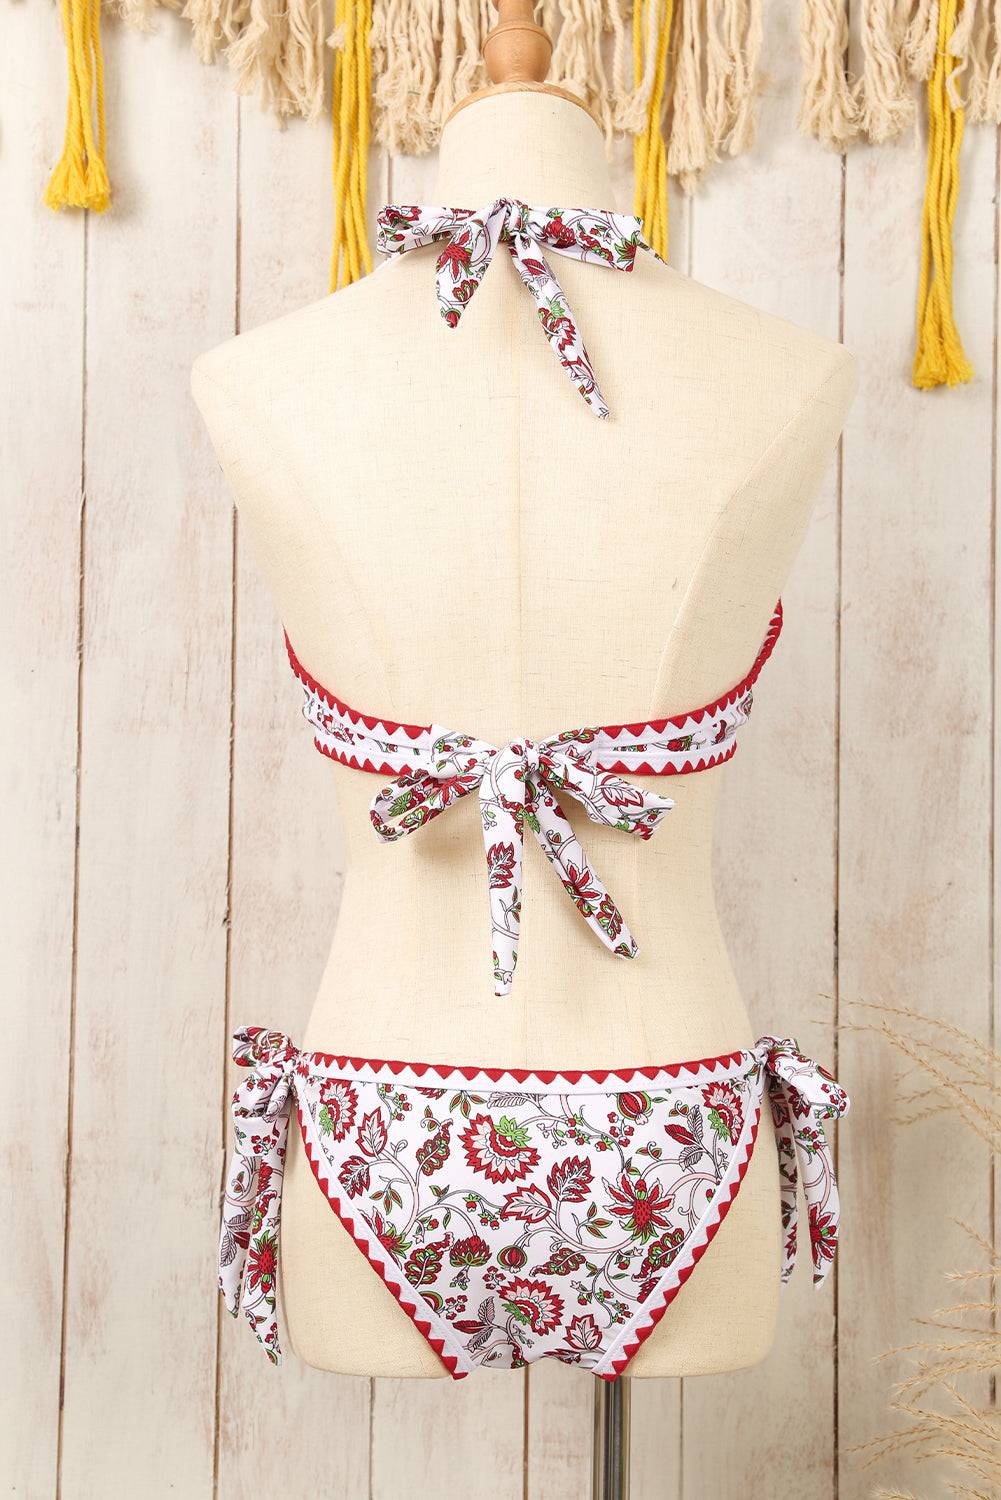 a mannequin wearing a red and white floral bikini